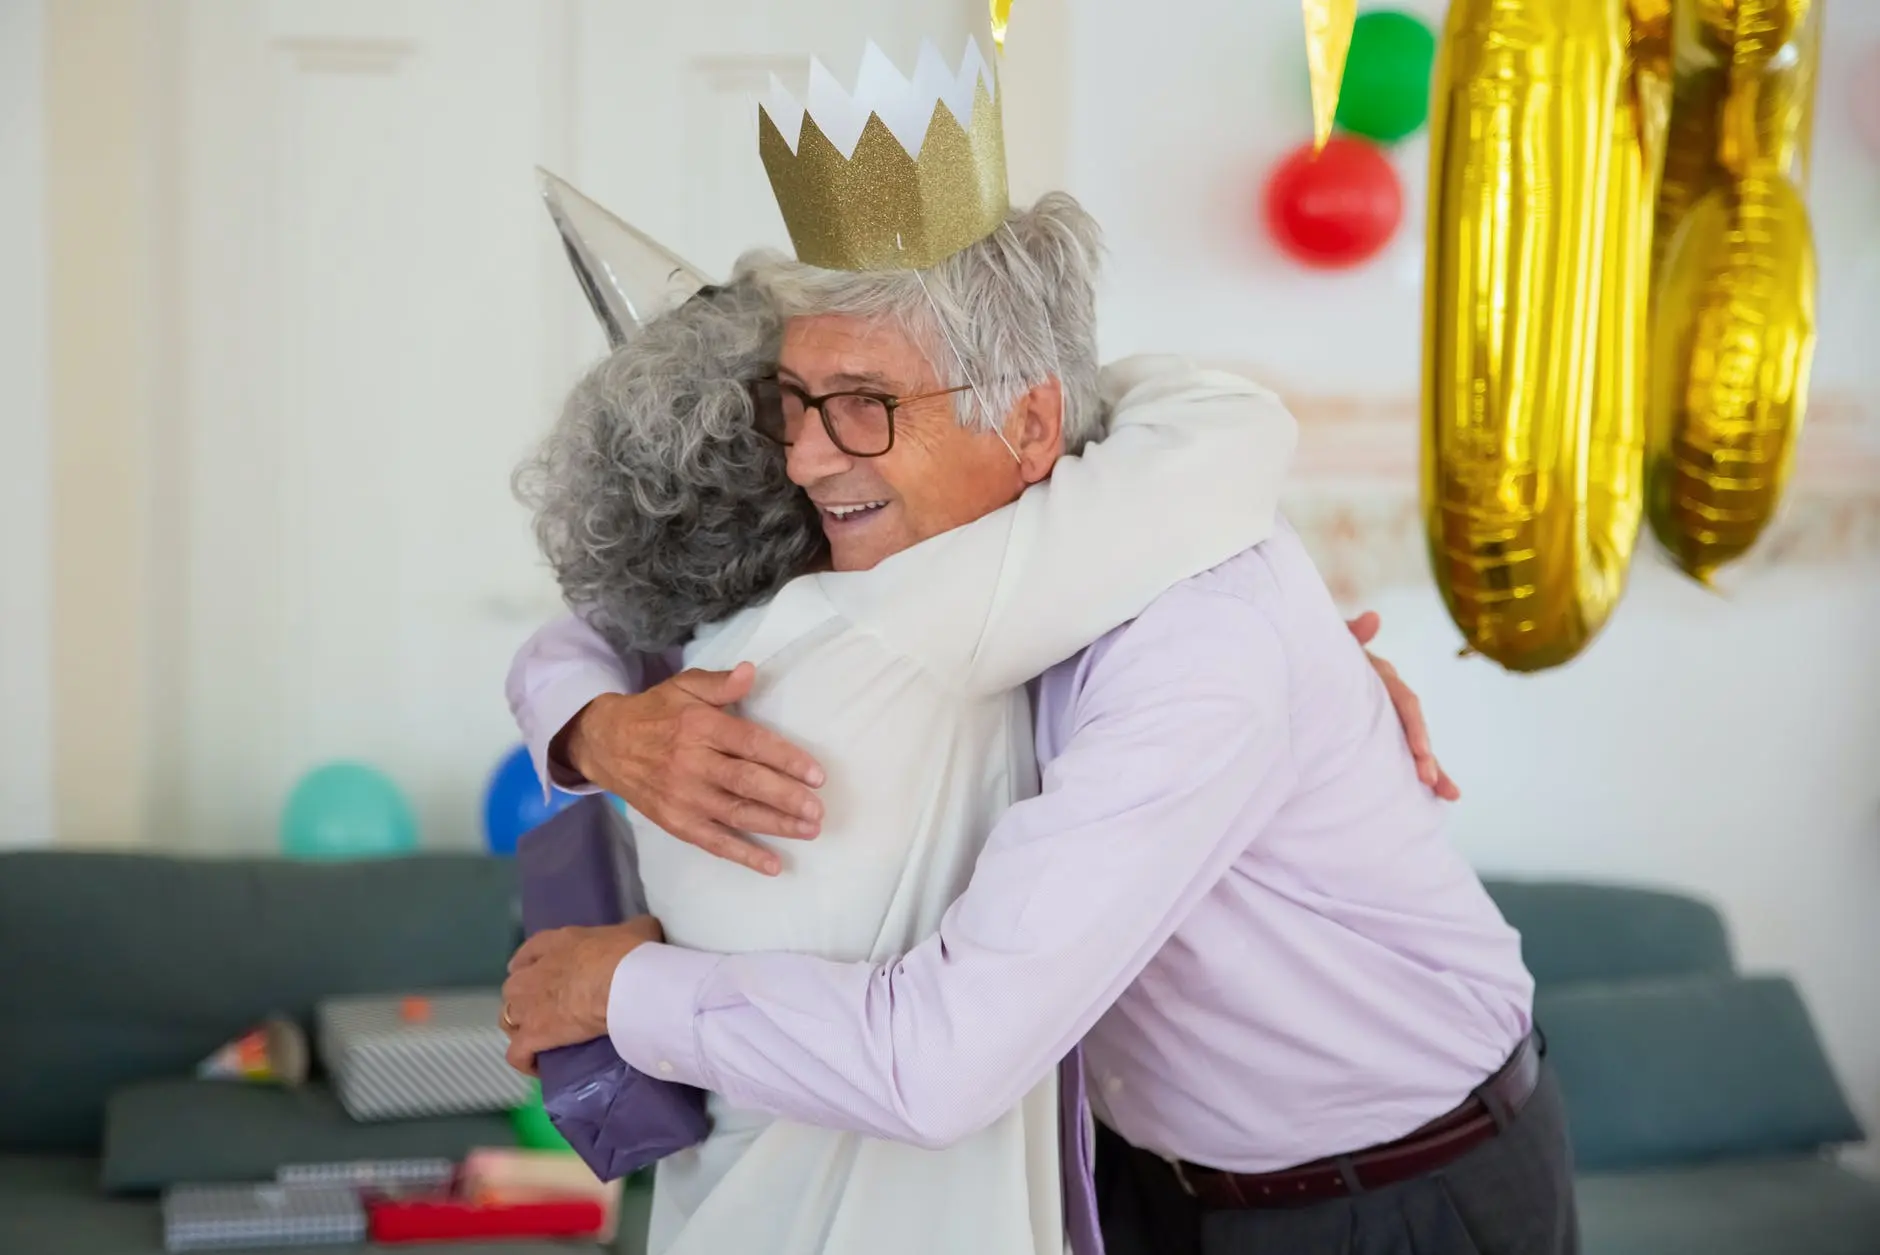 Elderly couple celebrating that they were able to qualify for a Medicare supplement plan